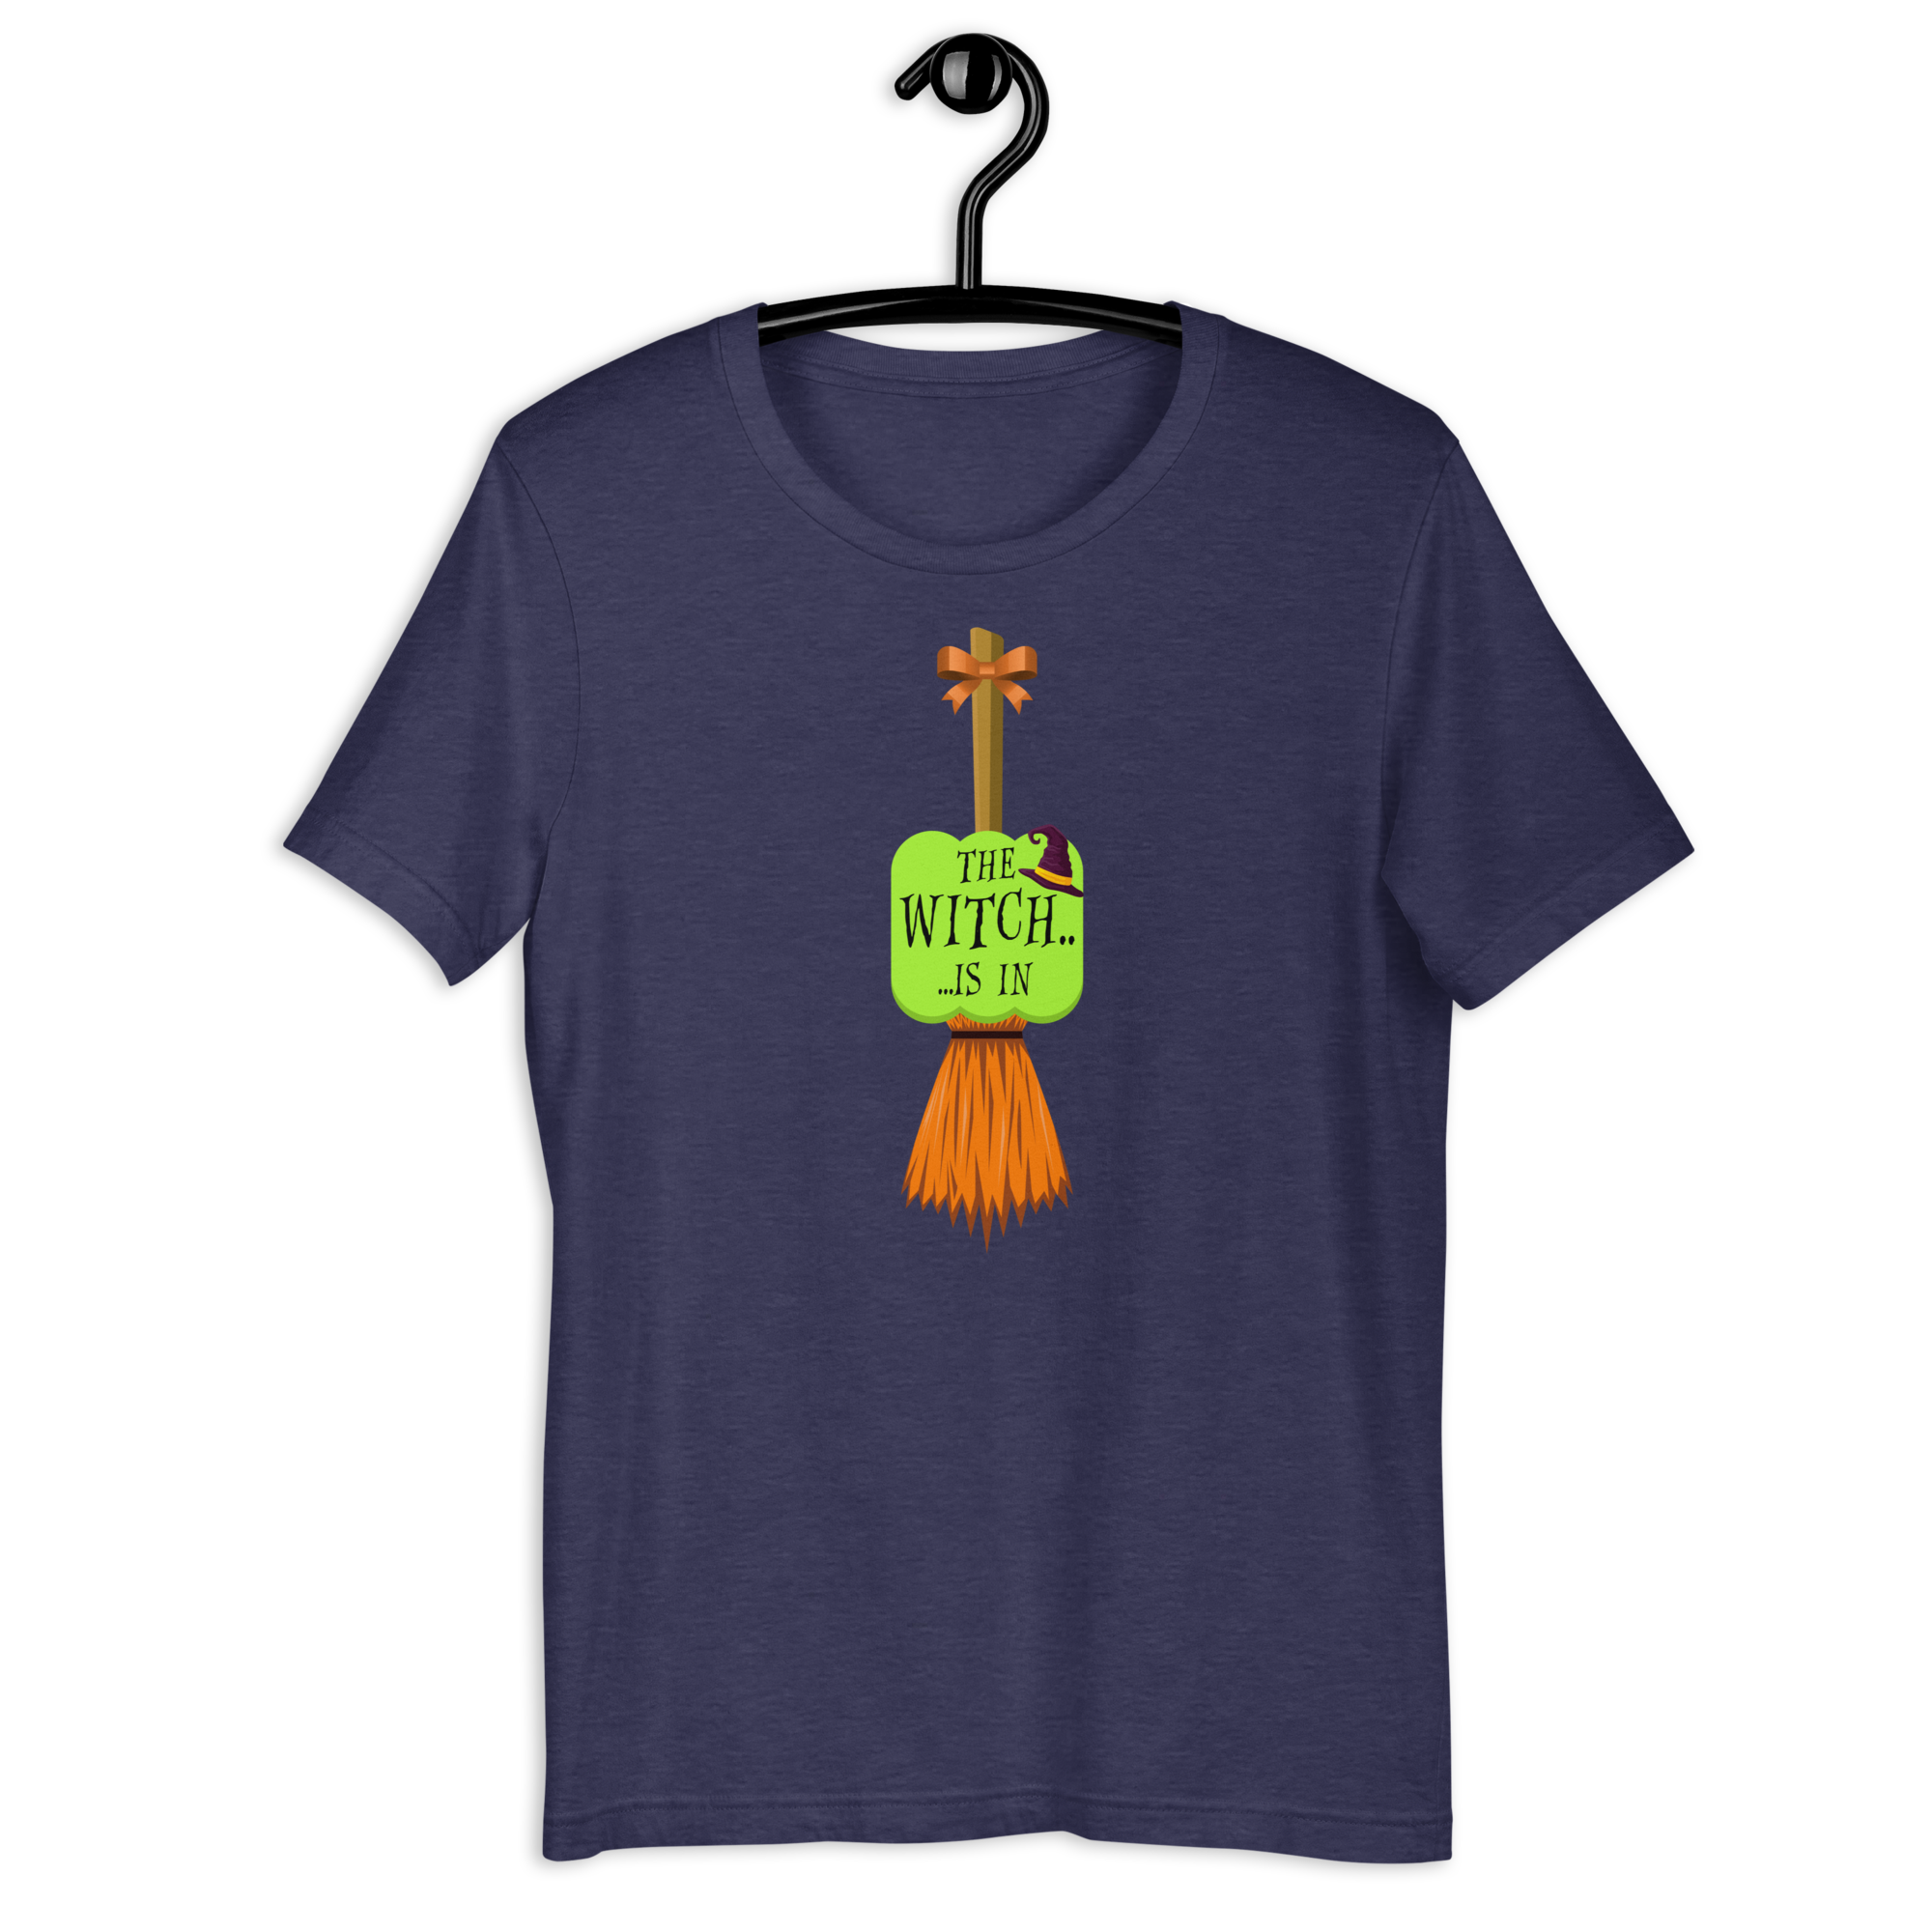 The Witch Is In - Halloween Unisex T-shirt